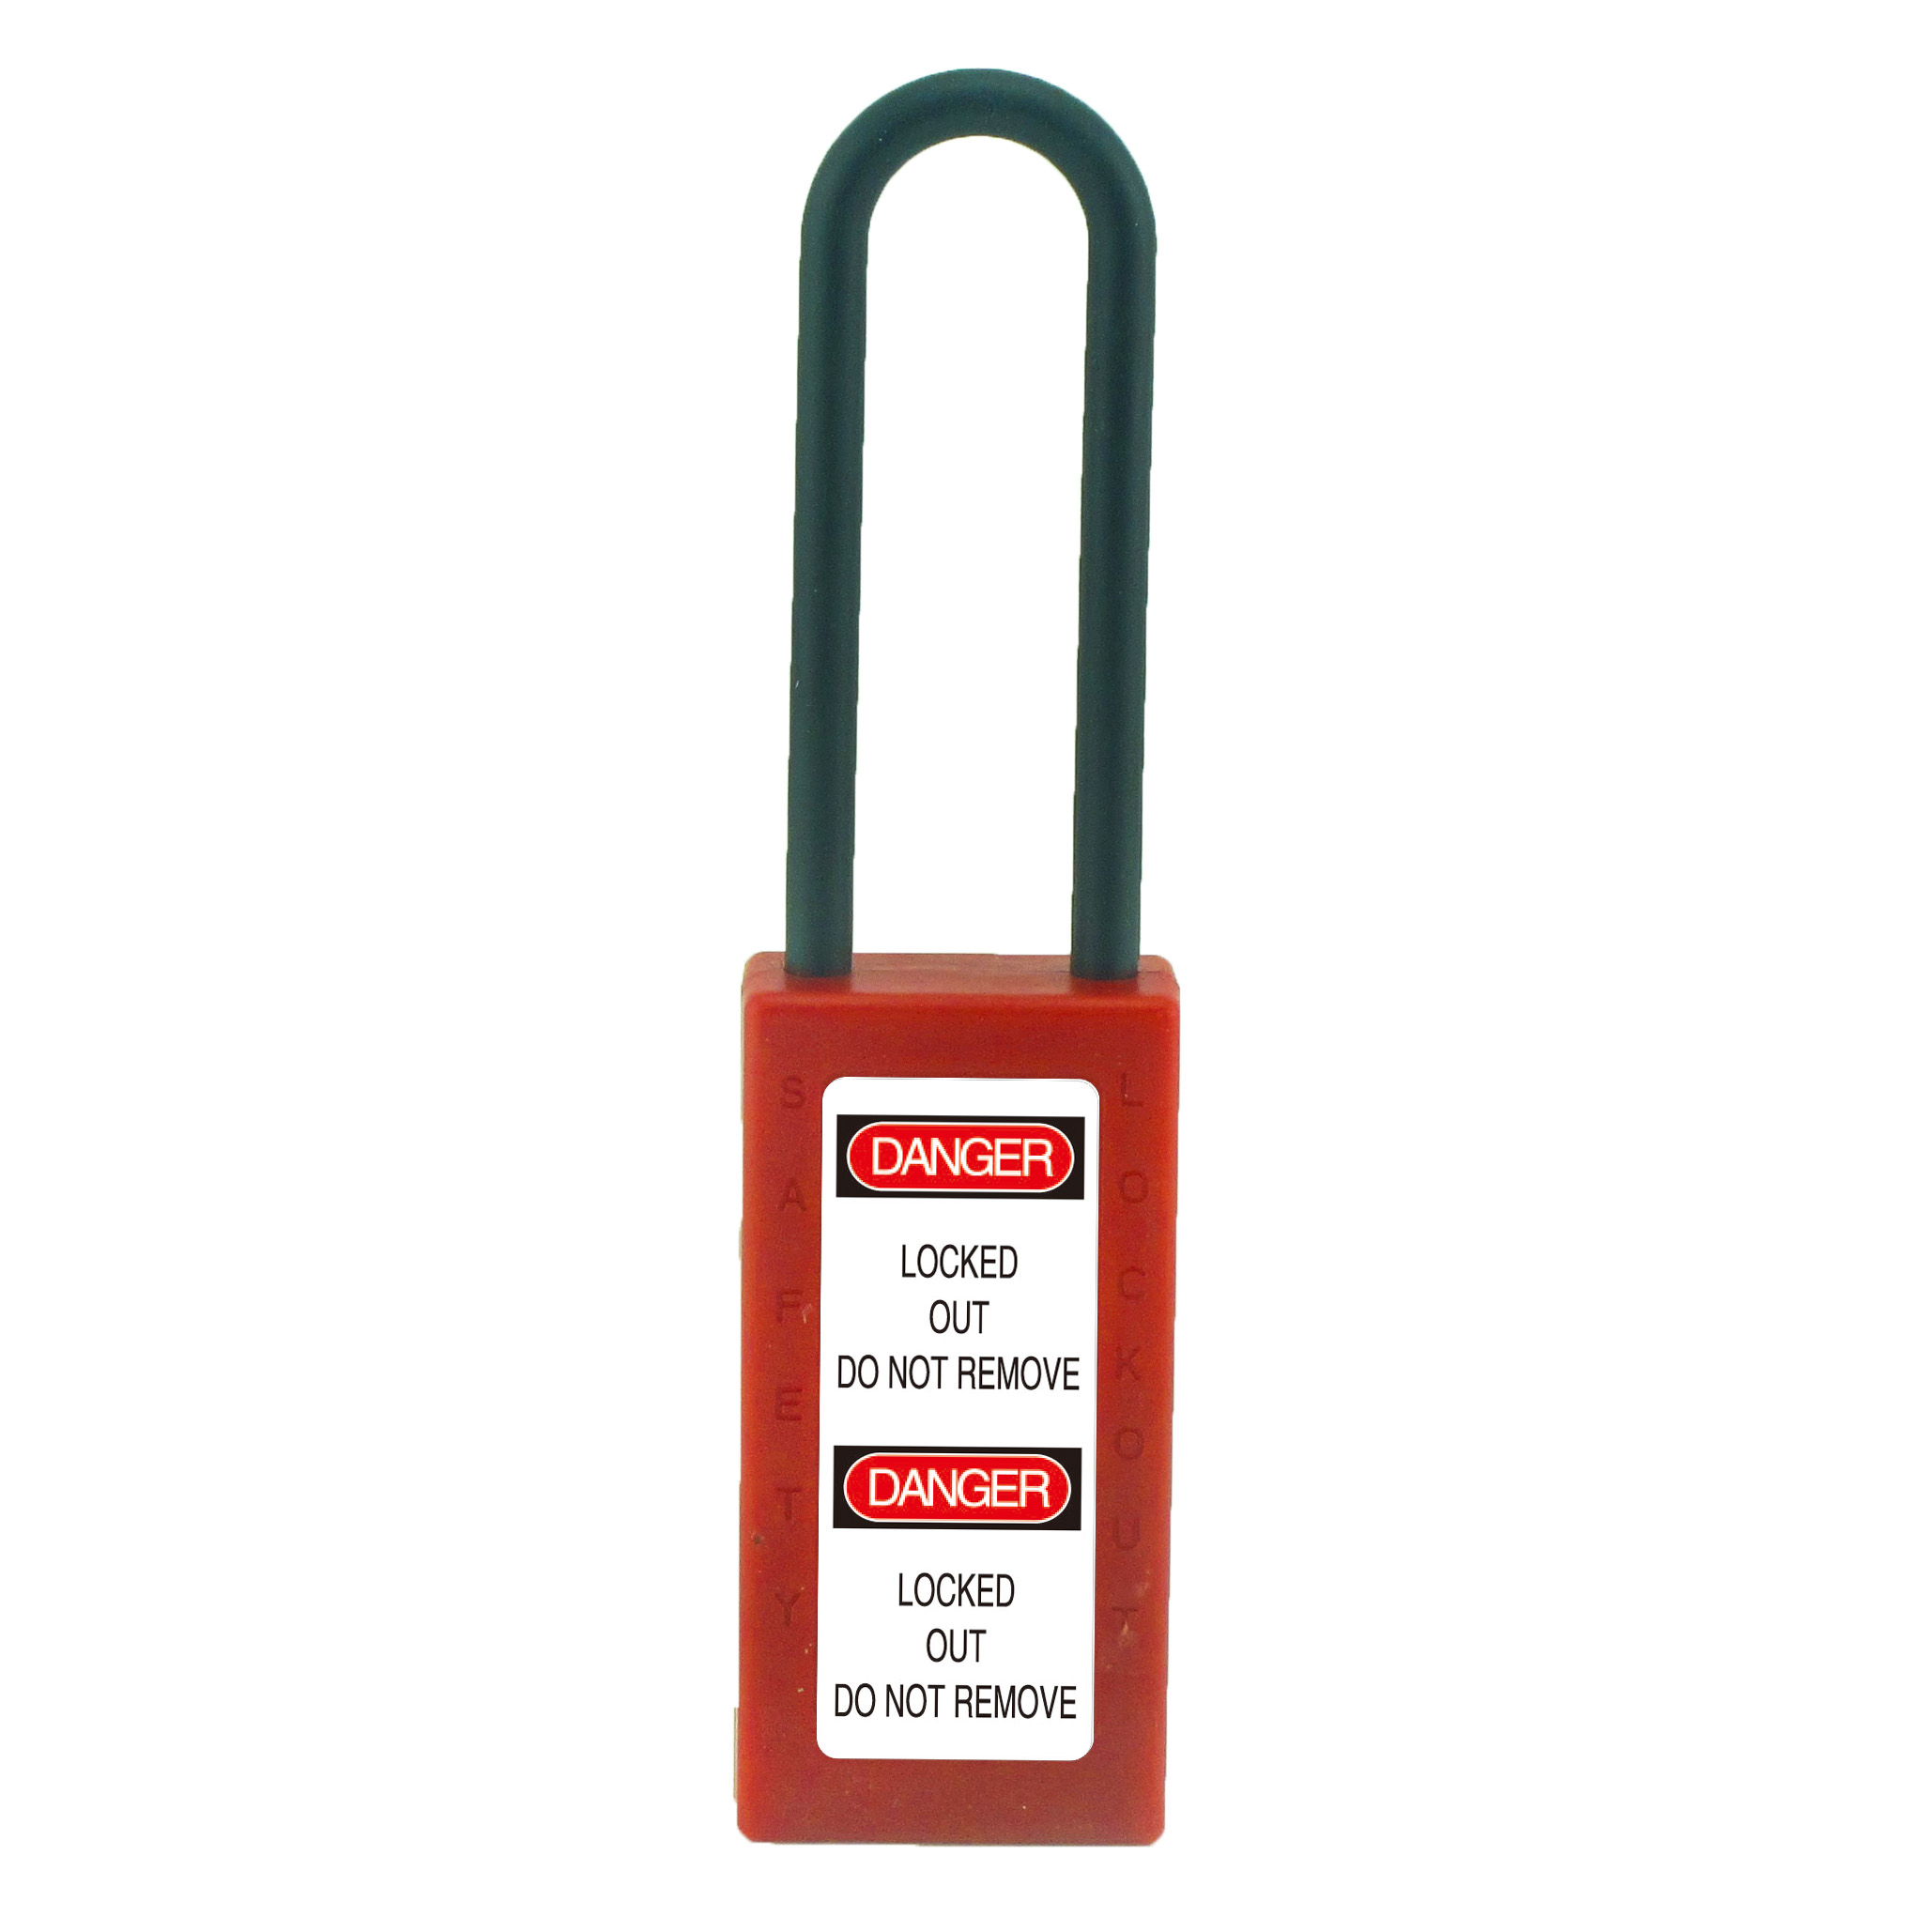 Discountable price Boshi Nylon Shackle Insulation 38mm Safety Padlock Featured Image